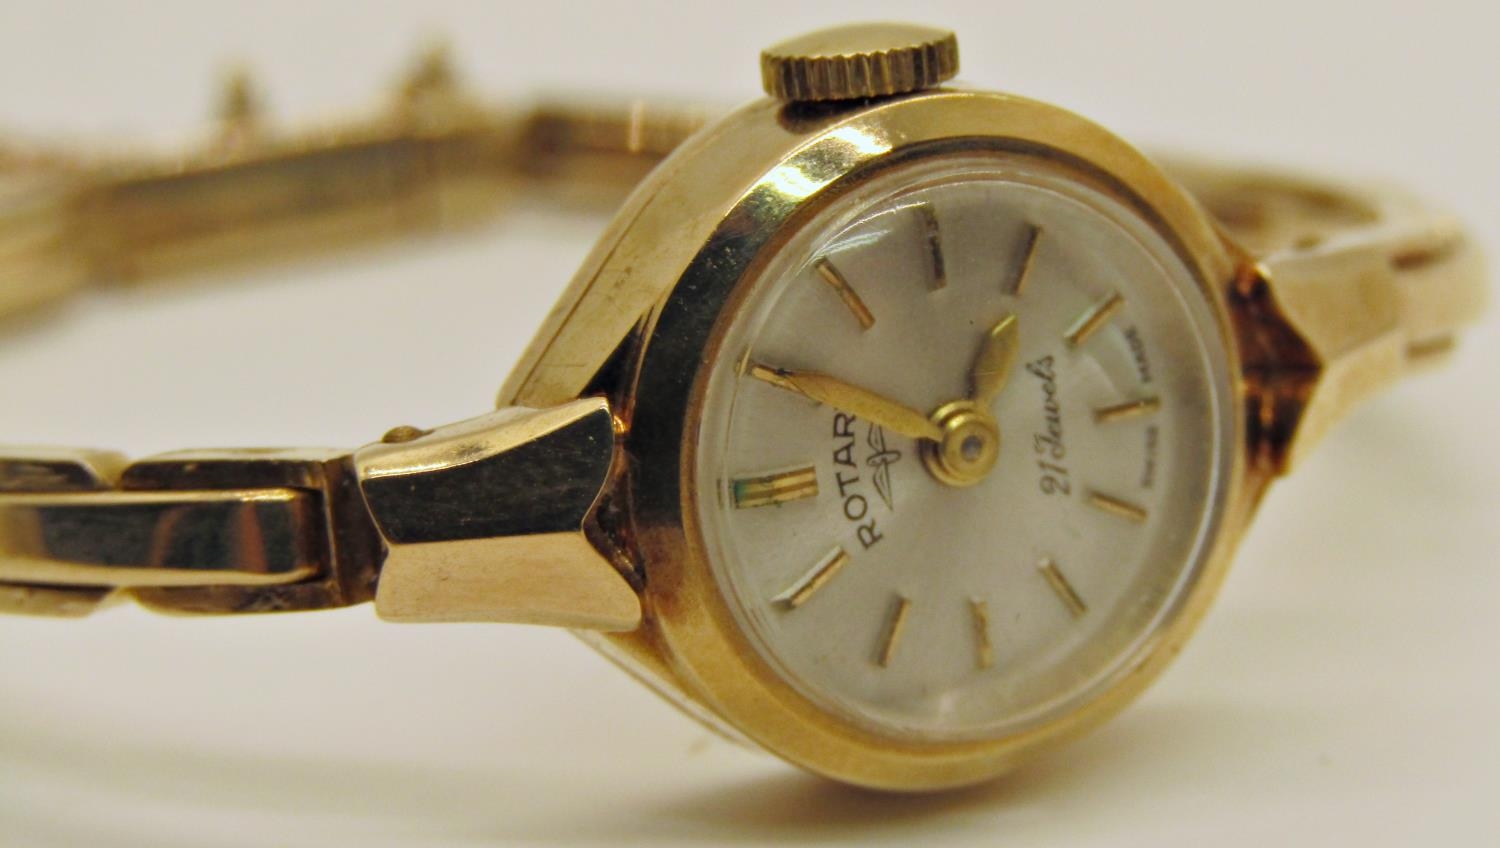 Rotary ladies dress watch with 9ct gold case and bracelet, 13gms all in - Image 2 of 5